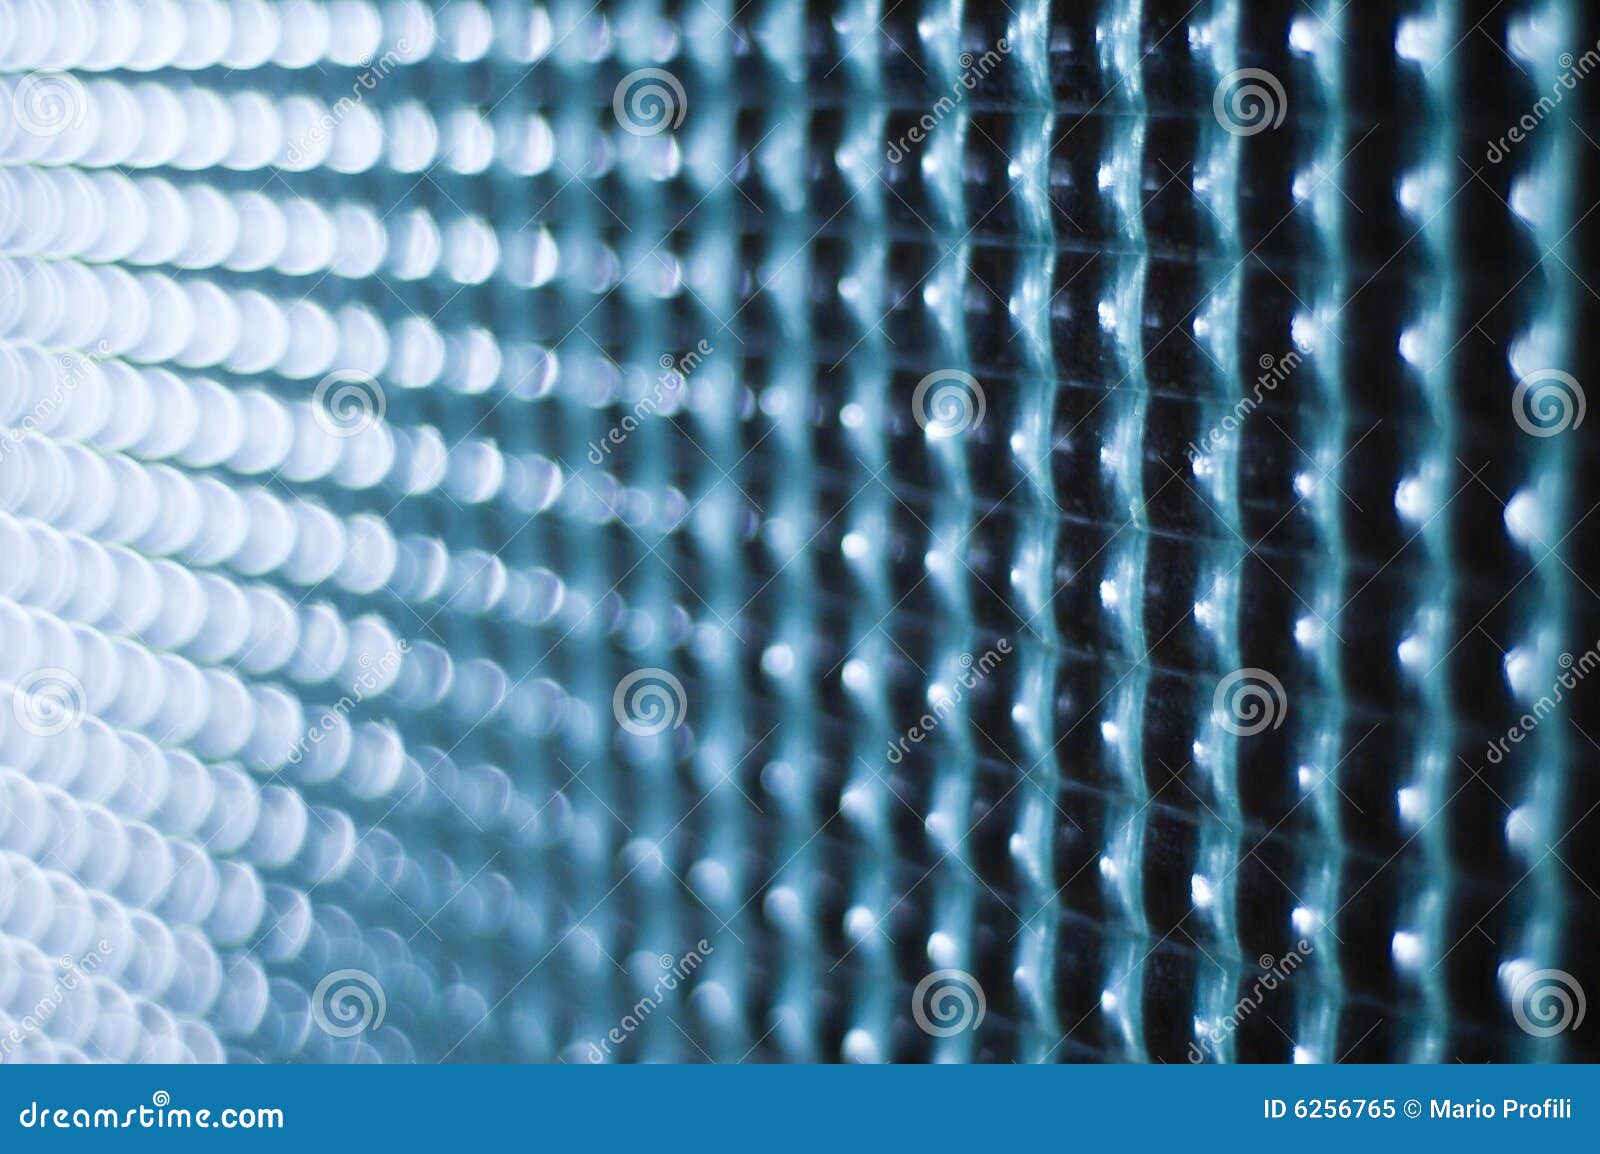 Glass square texture stock image. Image of black, glass - 6256765